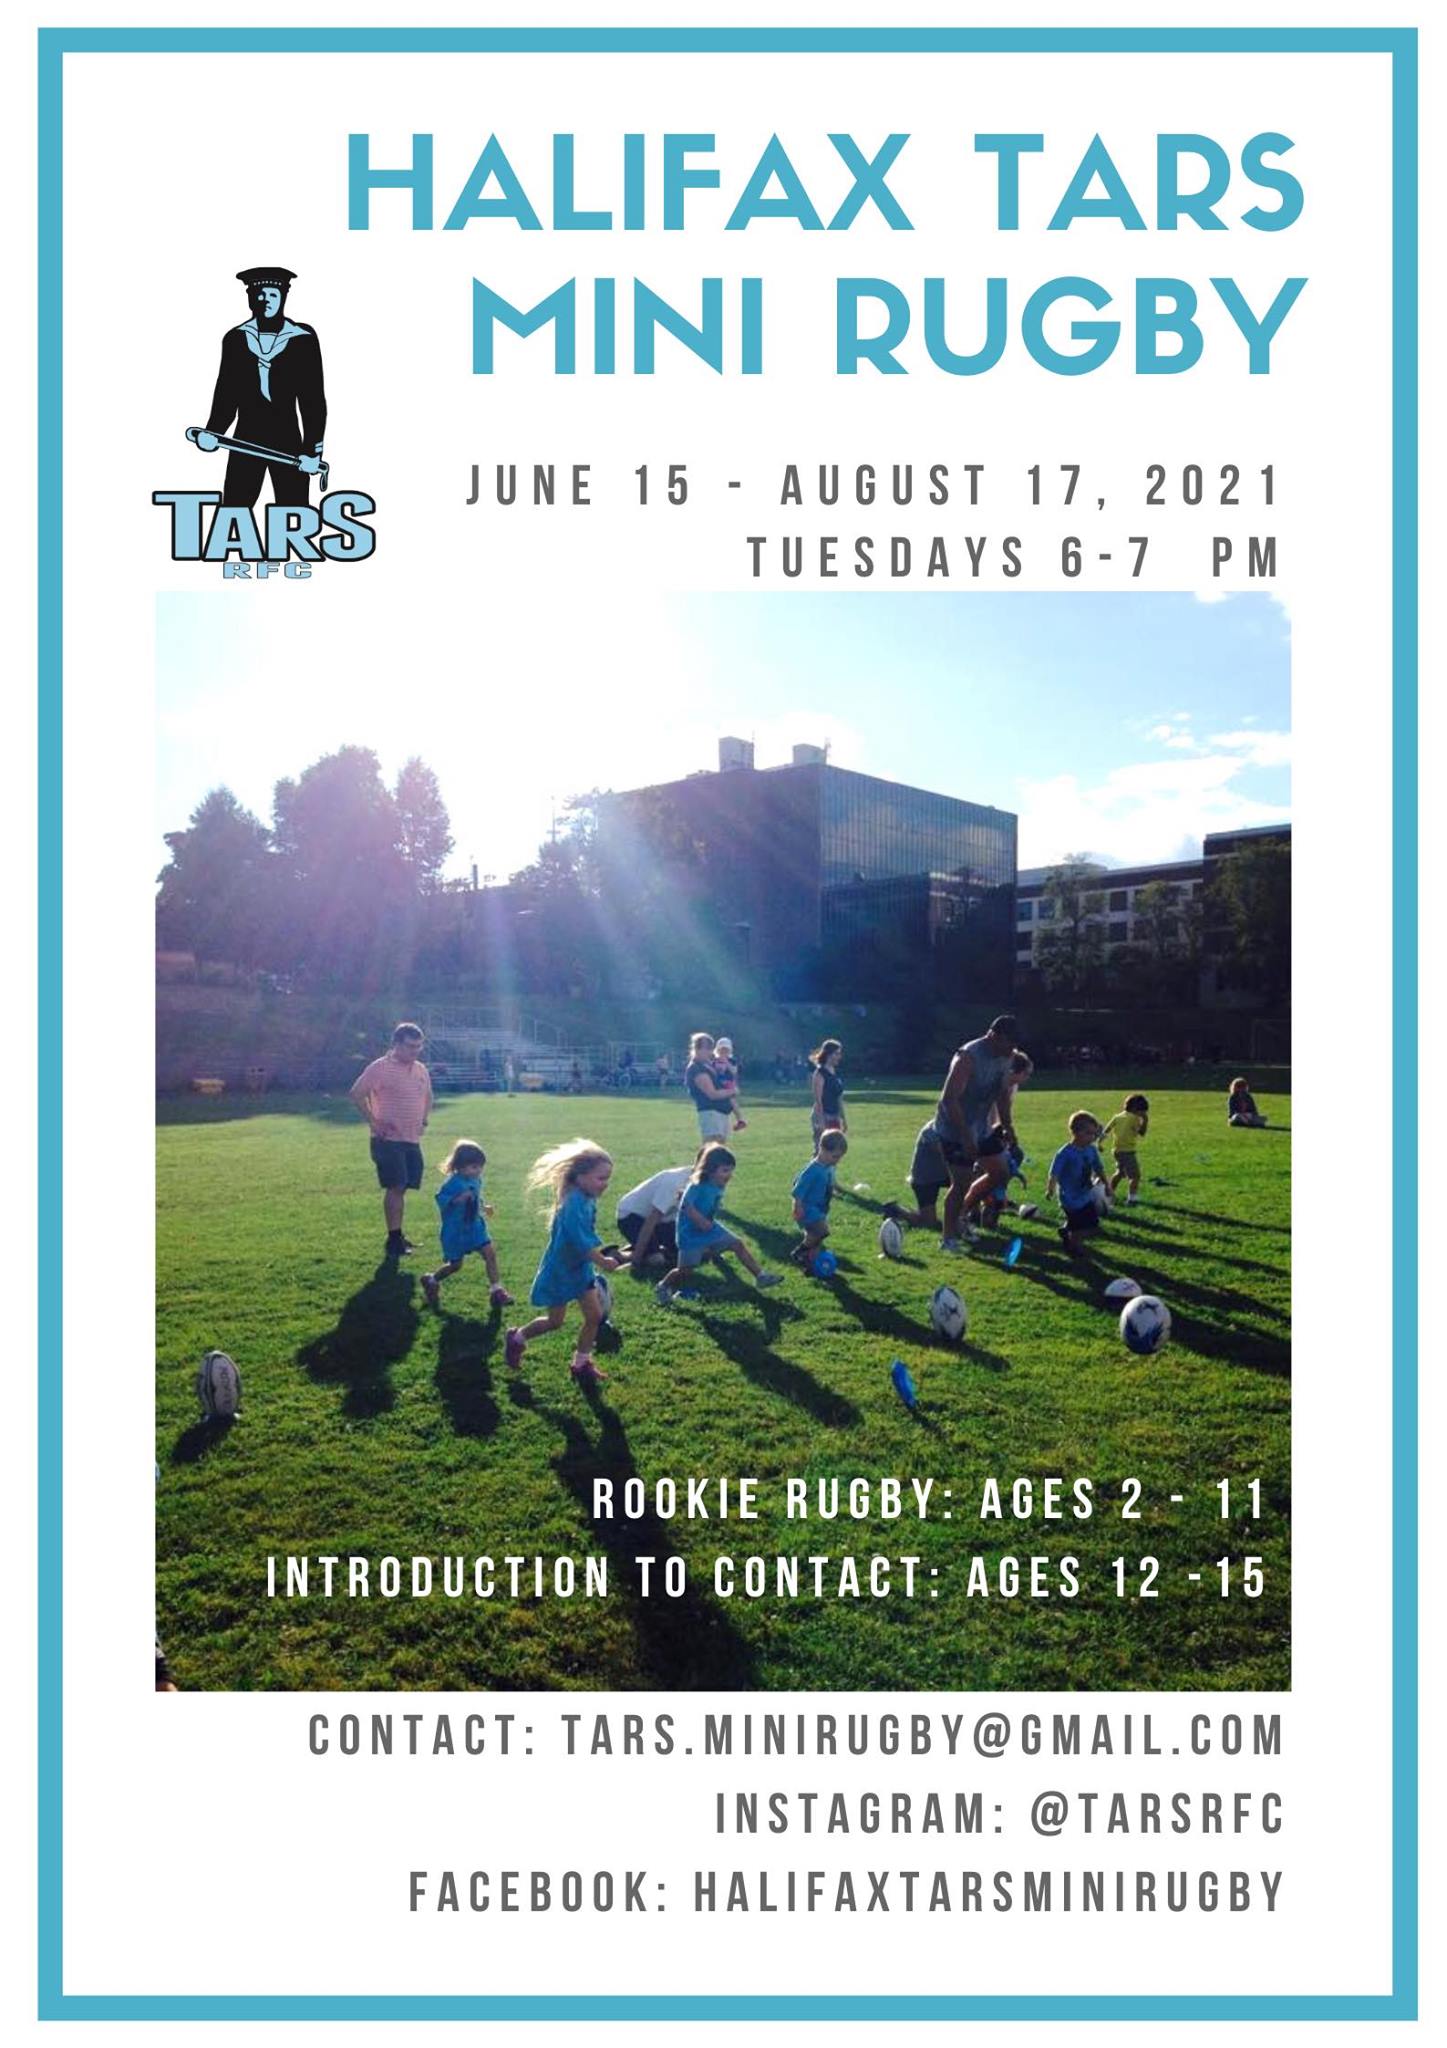 Mini Rugby is Back!